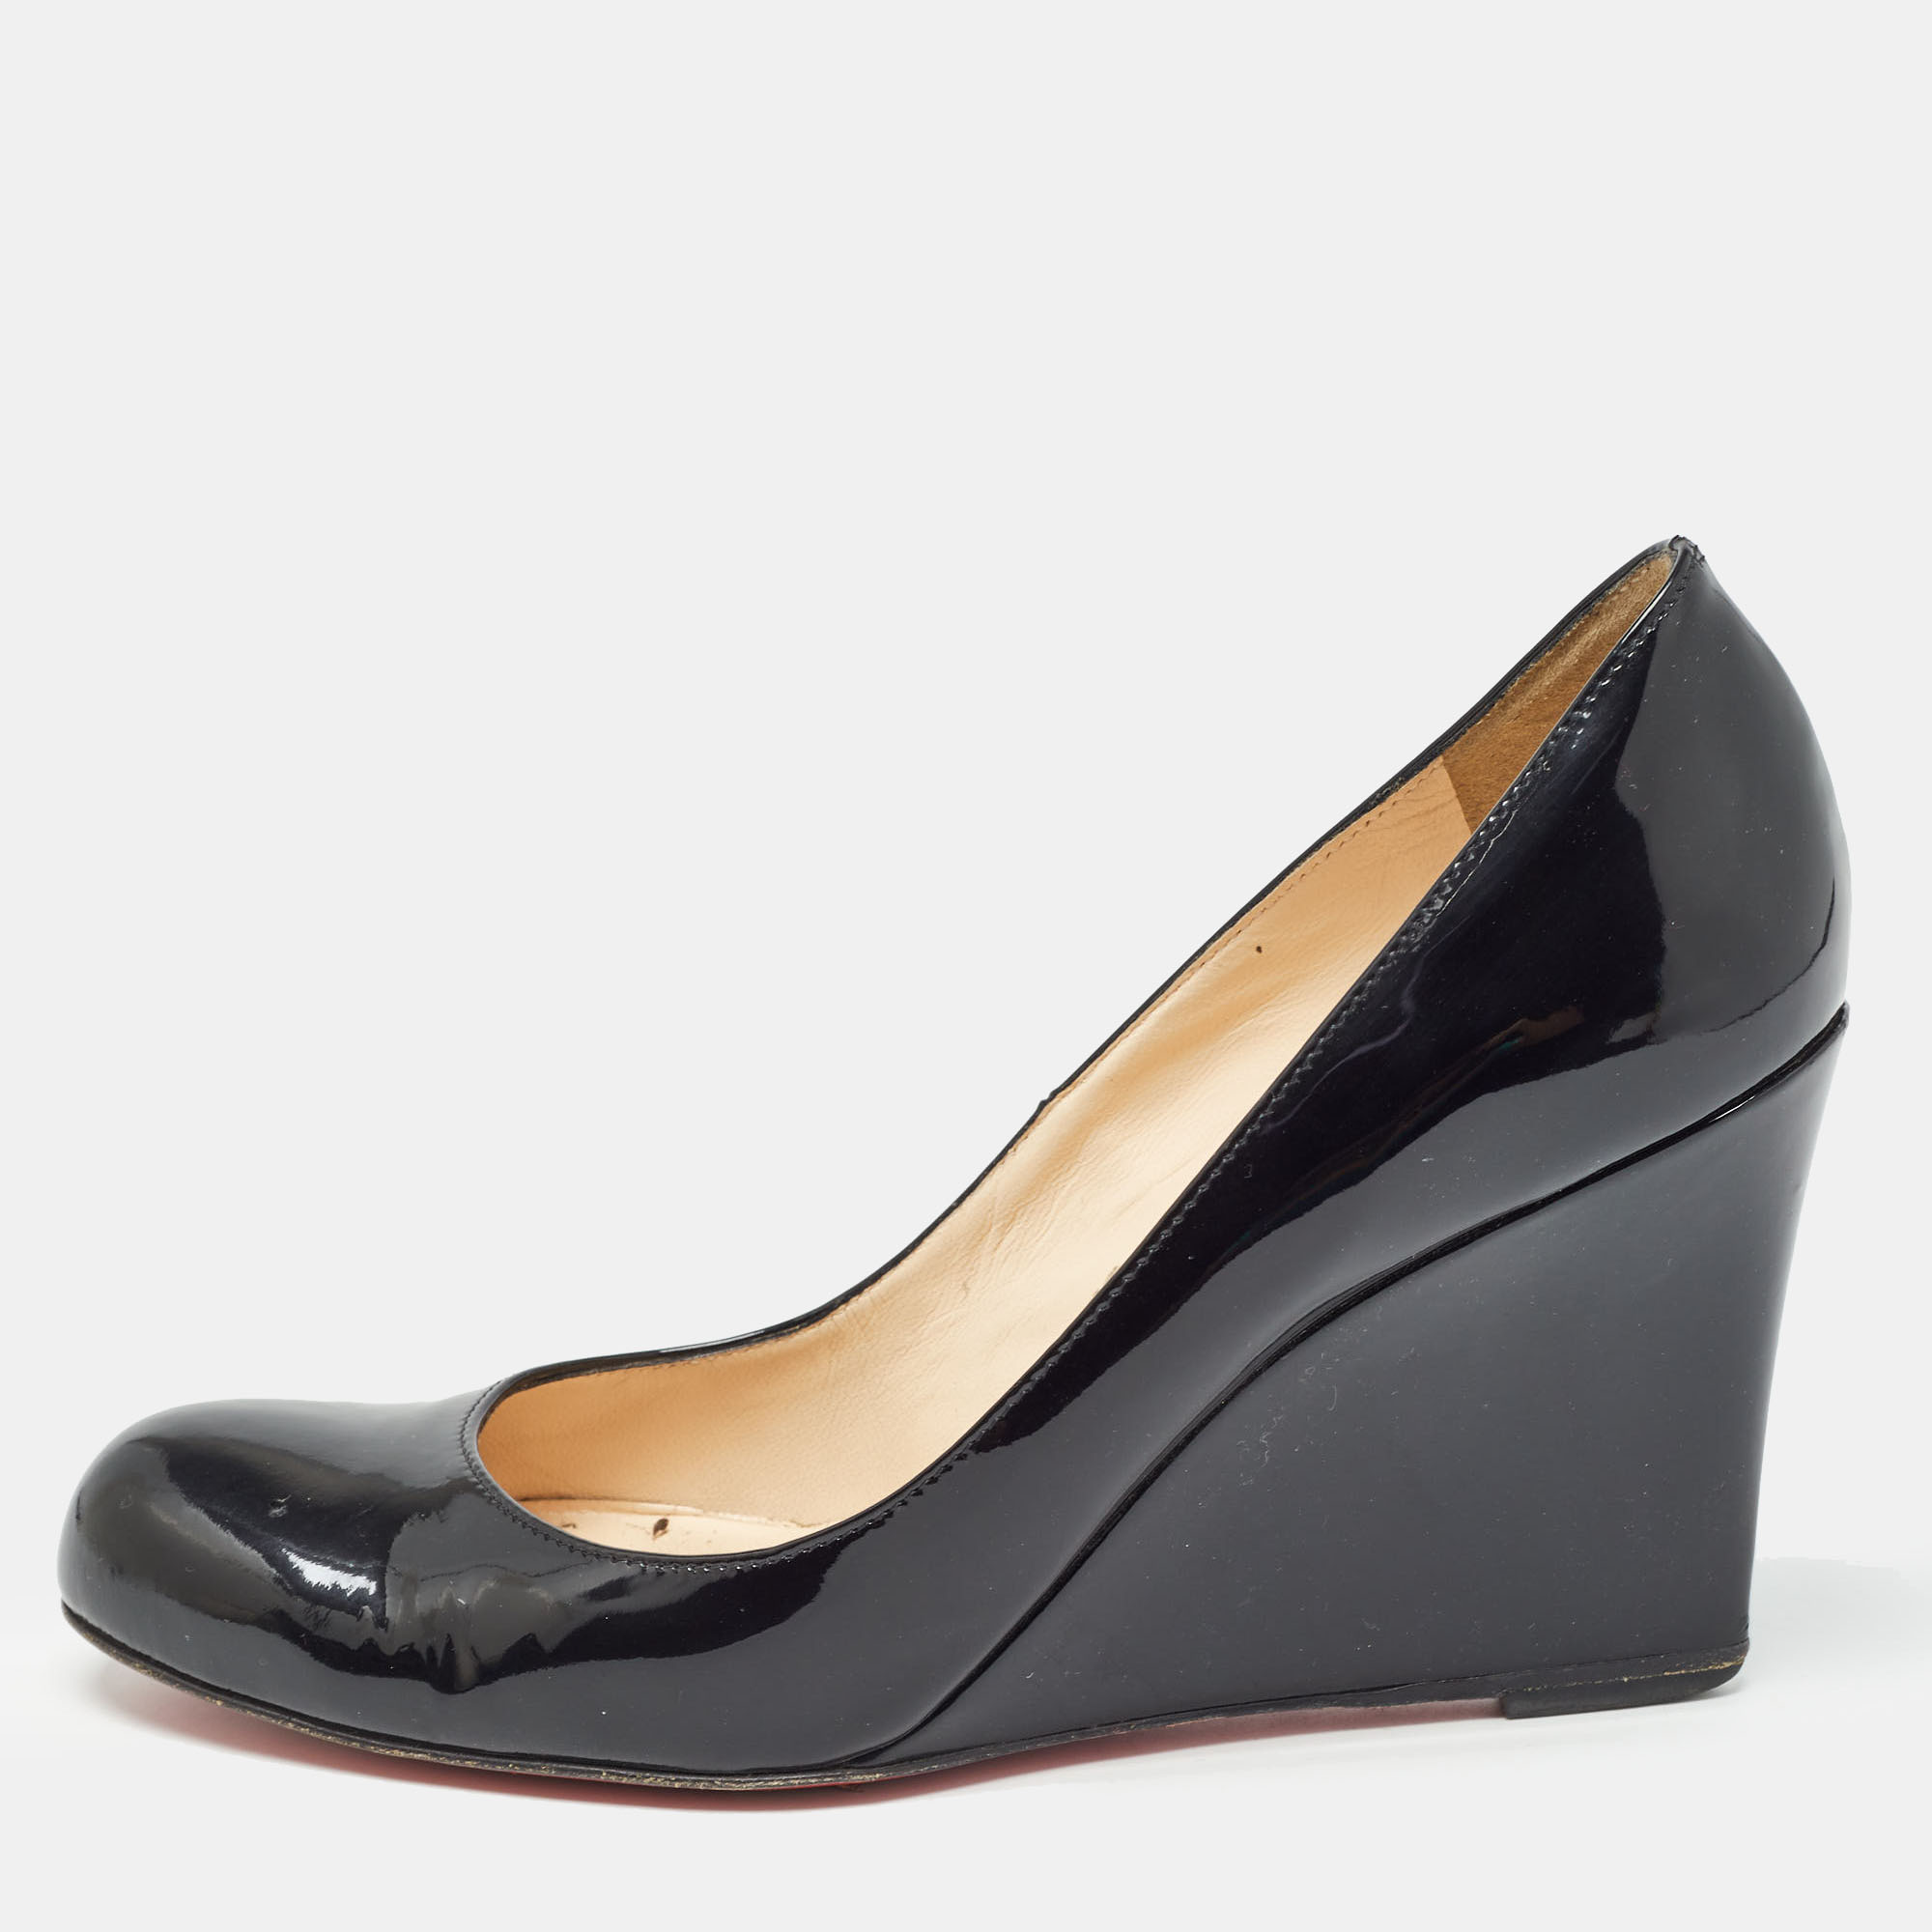 

Christian Louboutin Black Patent Leather Ron Ron Wedge Pumps Size